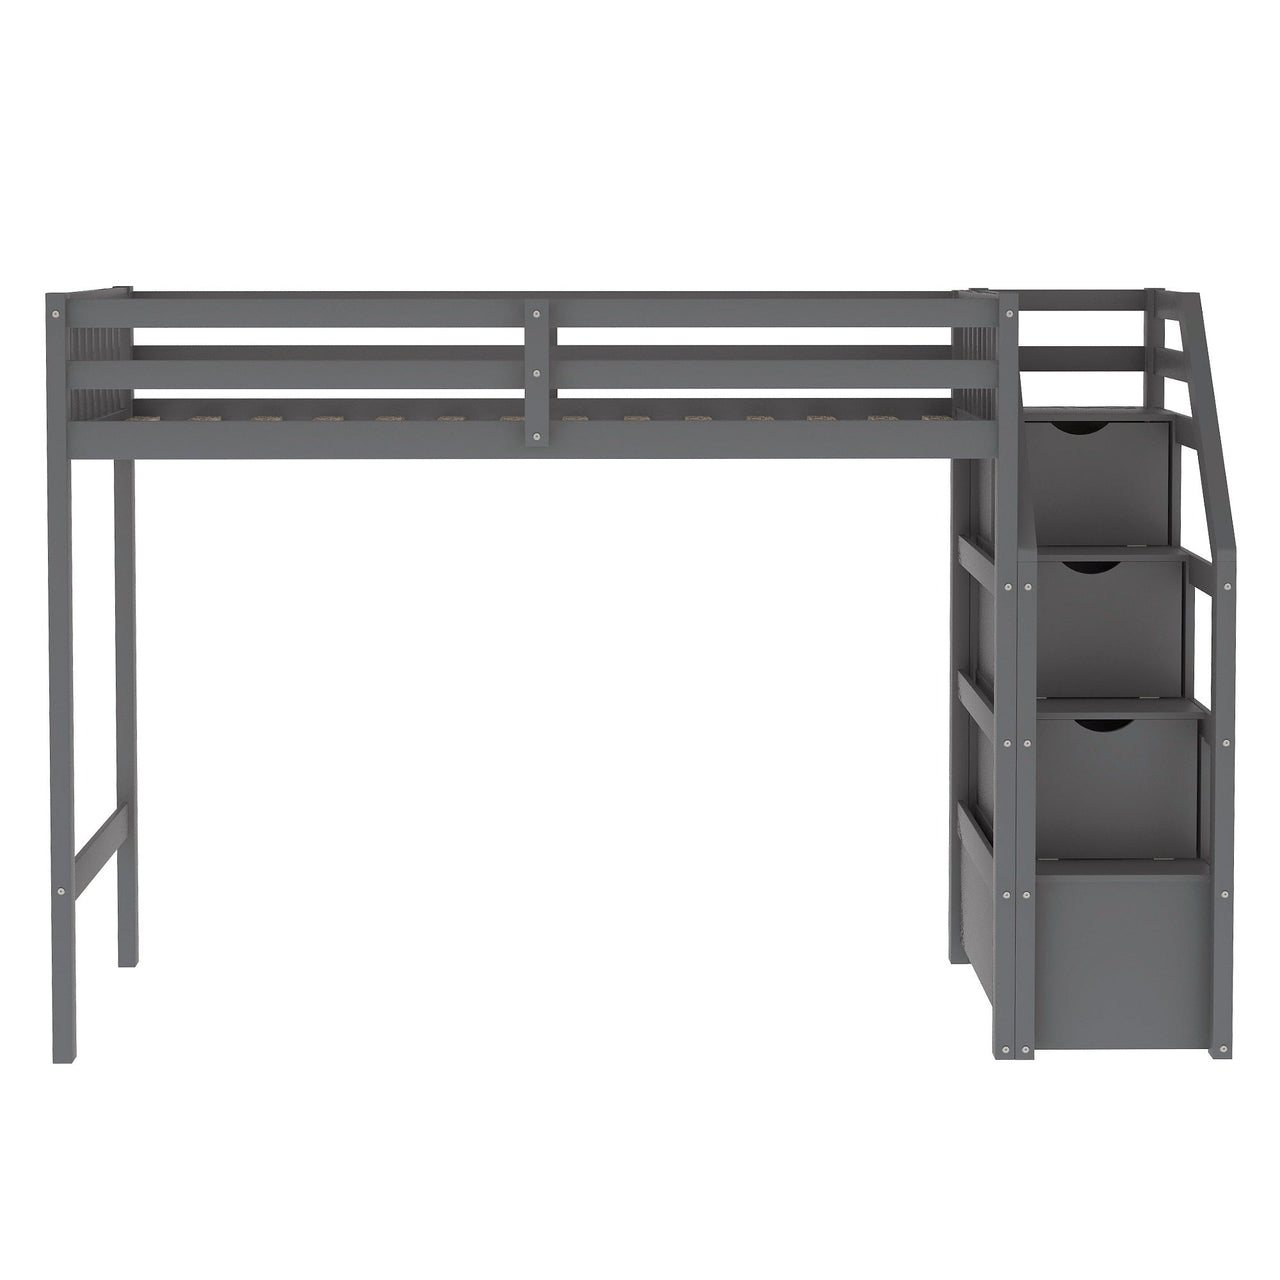 Twin Bunk Bed with Stairs and Drawers - Casatrail.com